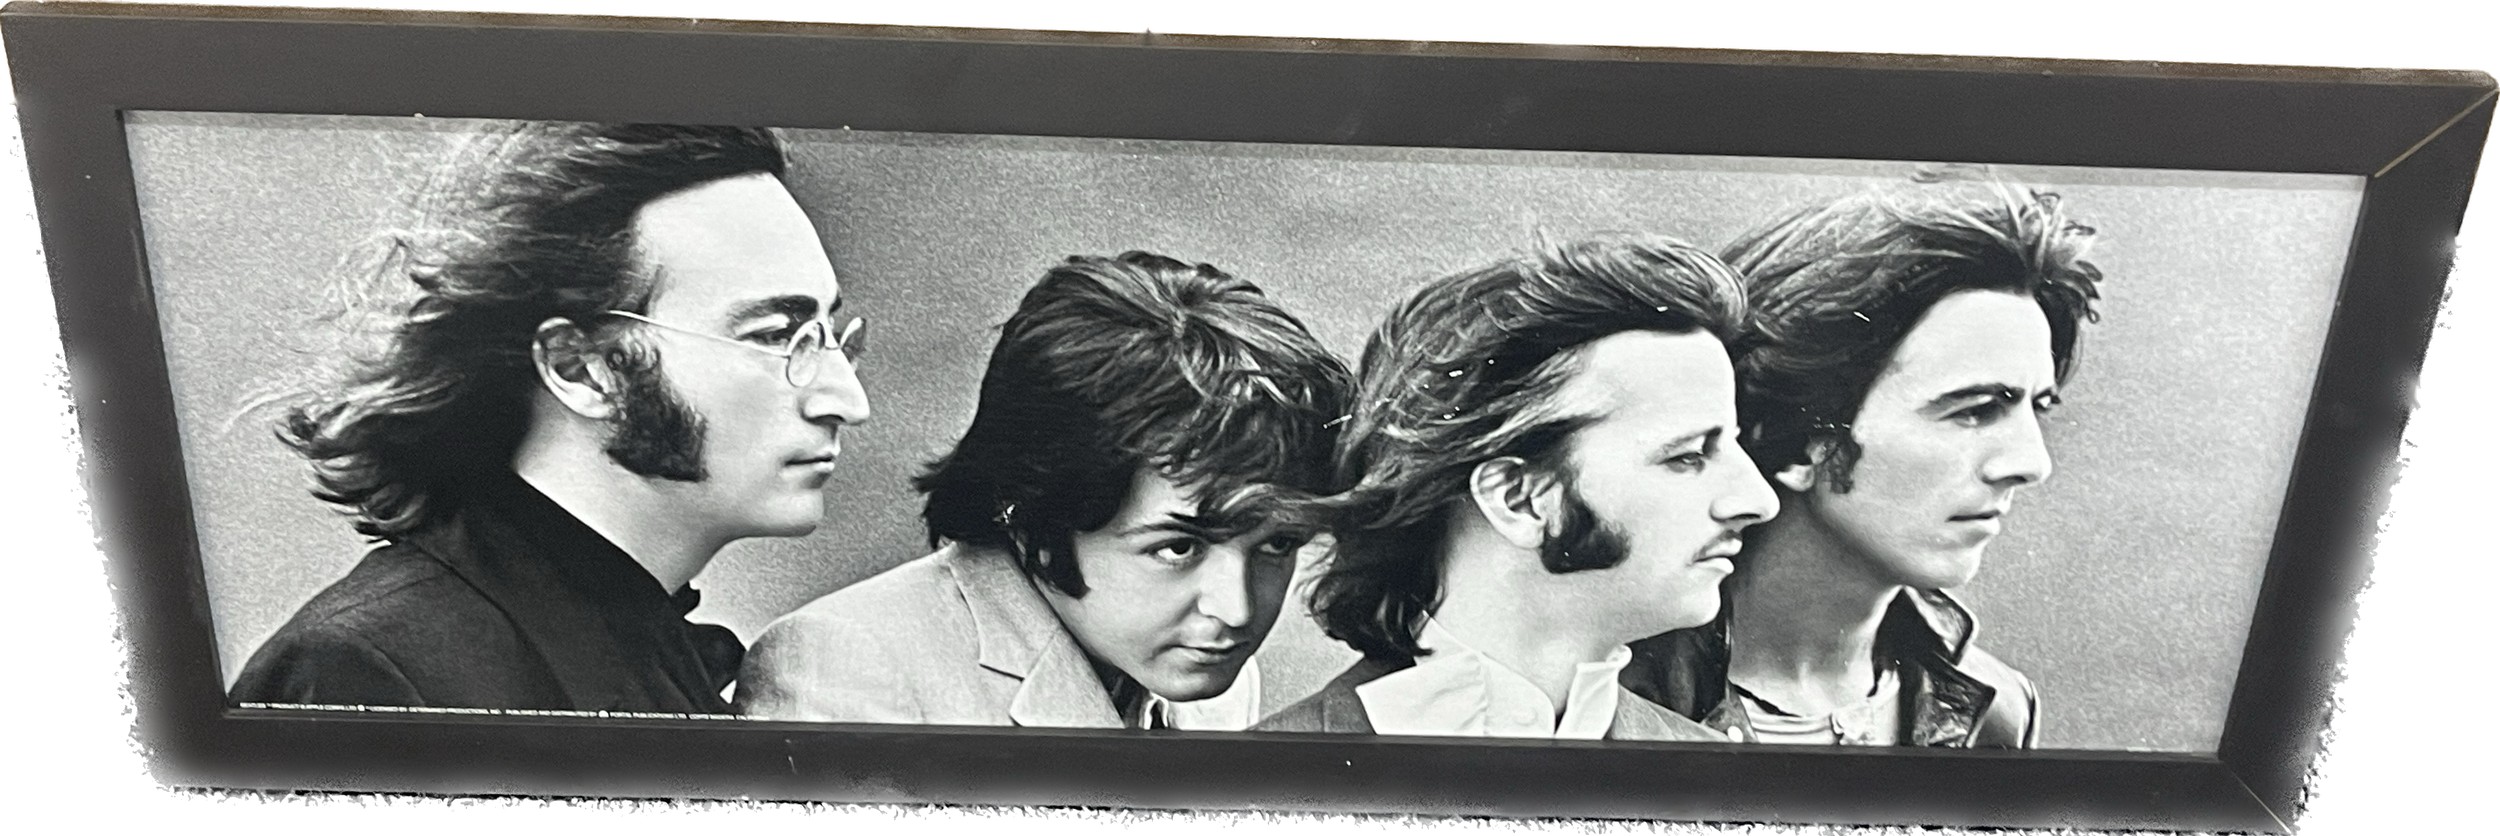 Framed Beatles print measures 36 inches by 16 inches - Image 5 of 5